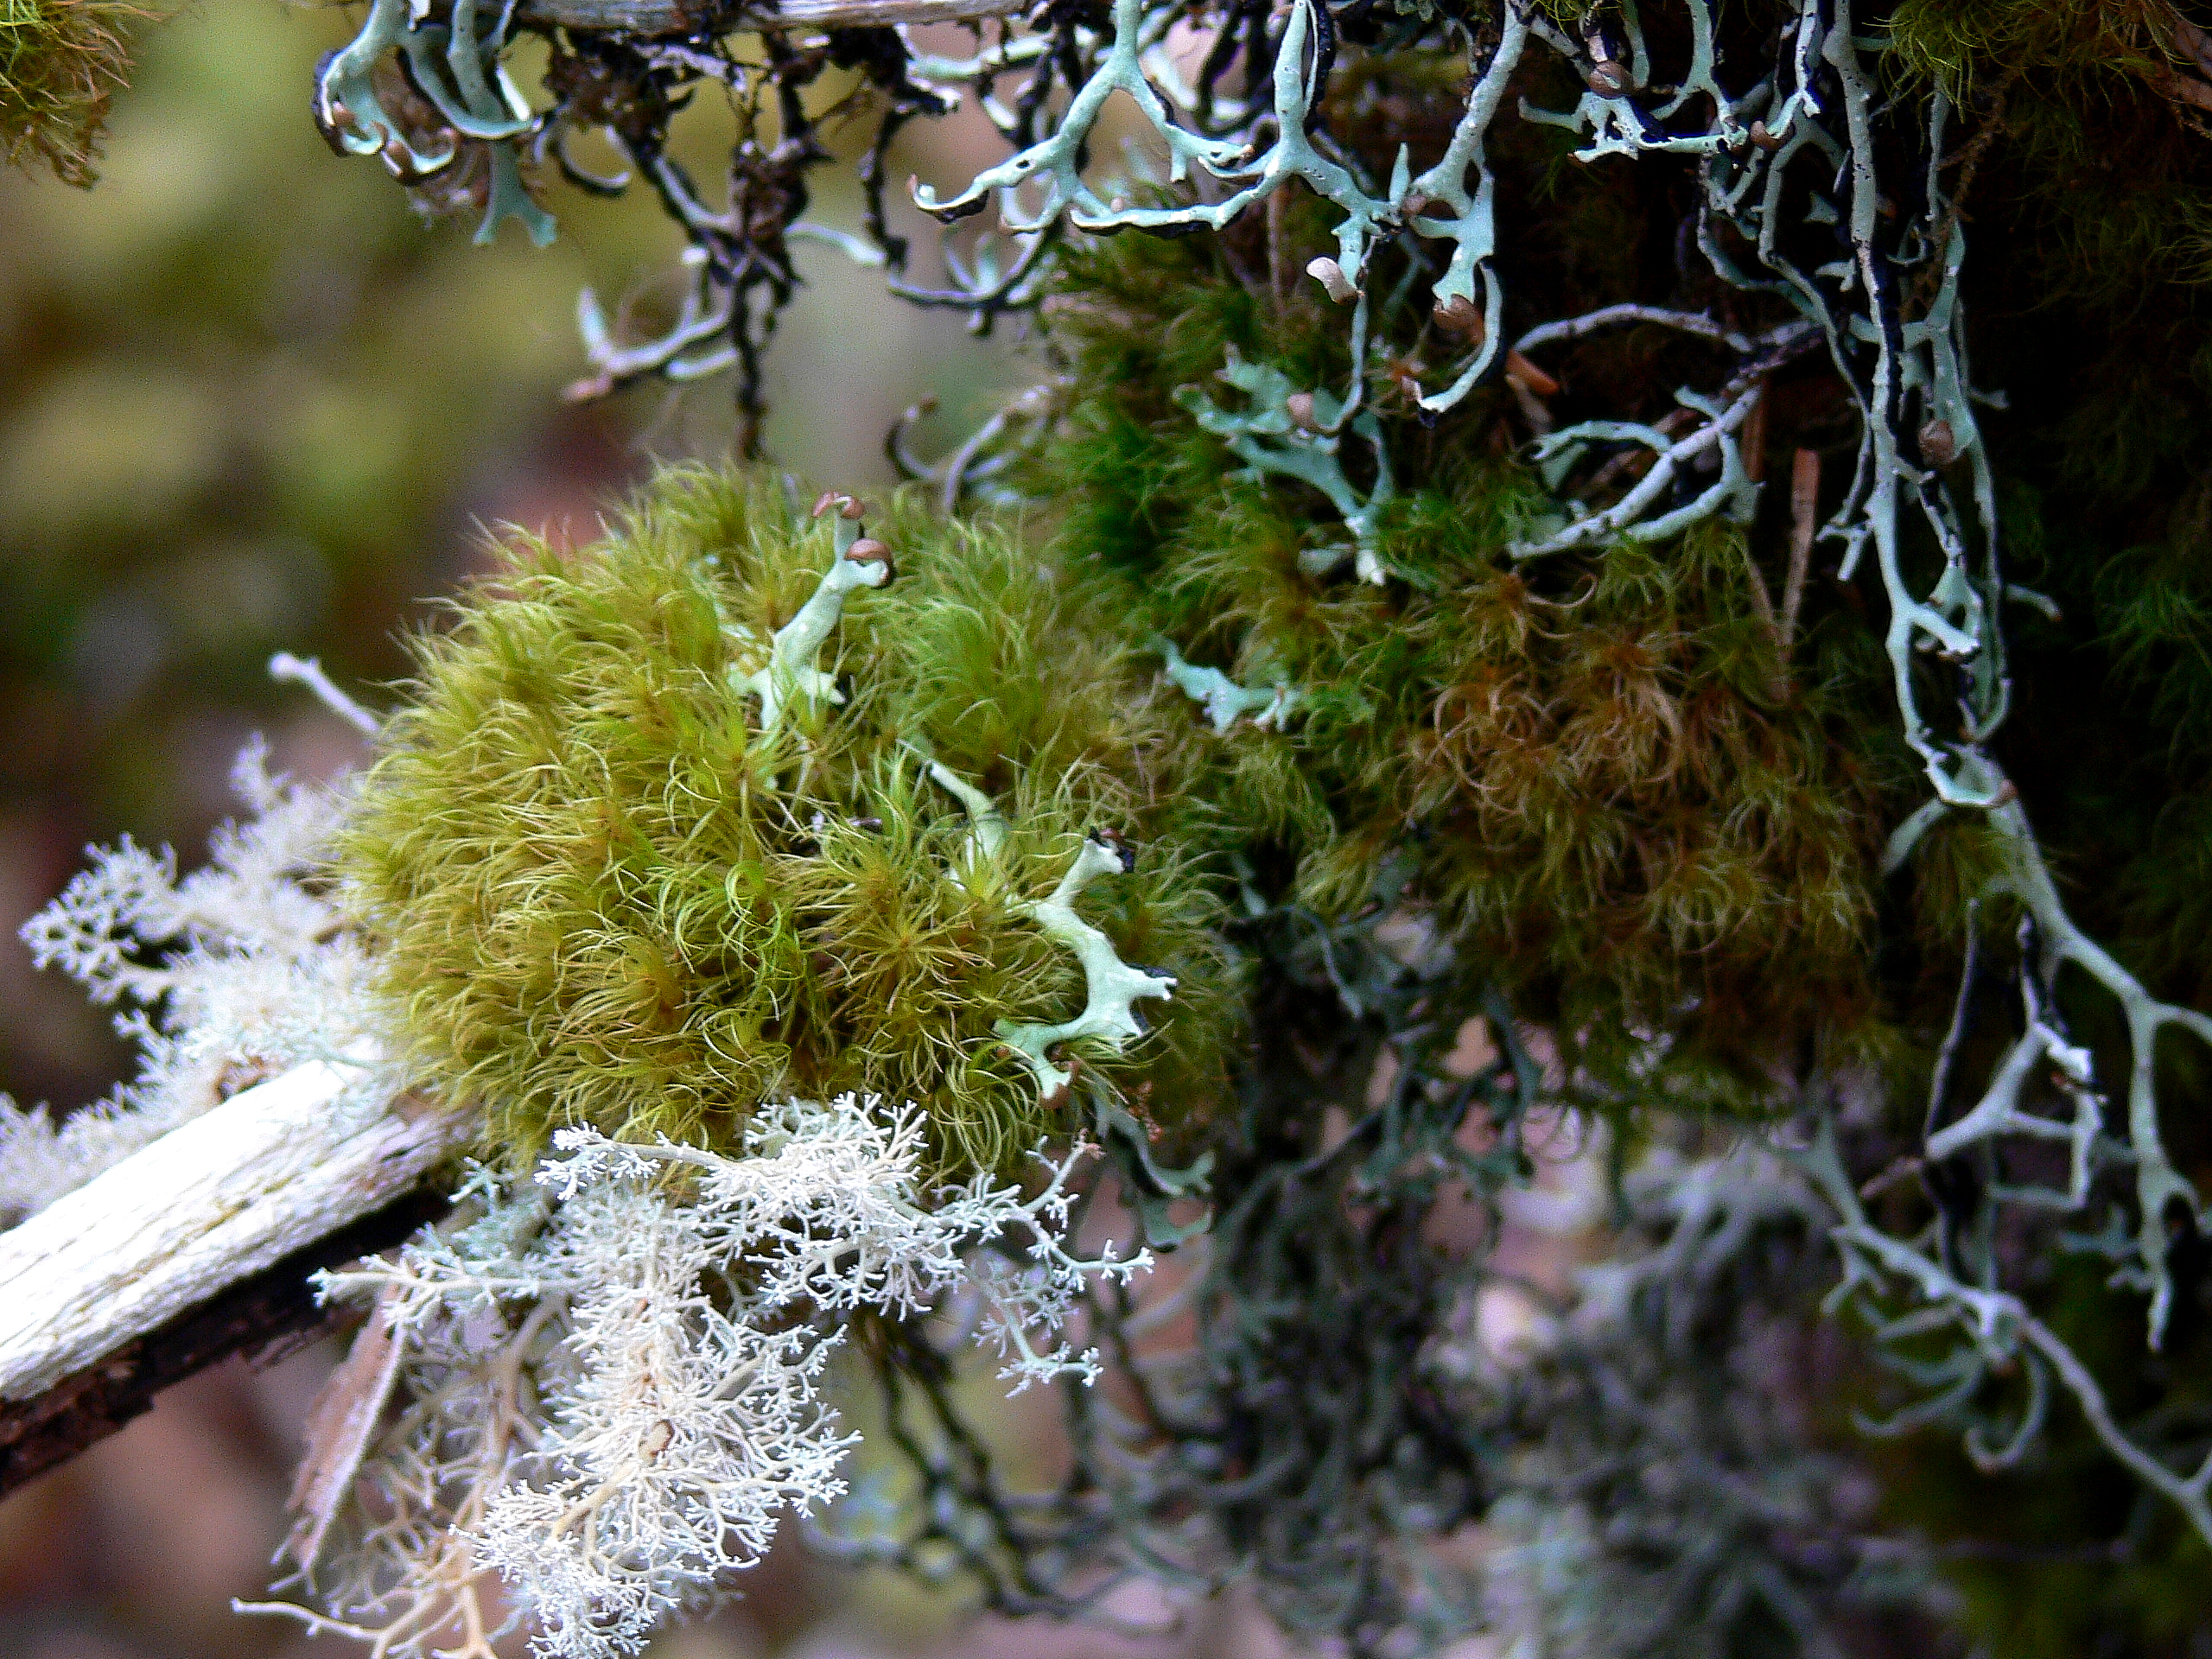 Close up shot of balls and moss and lichens clustered on a stick